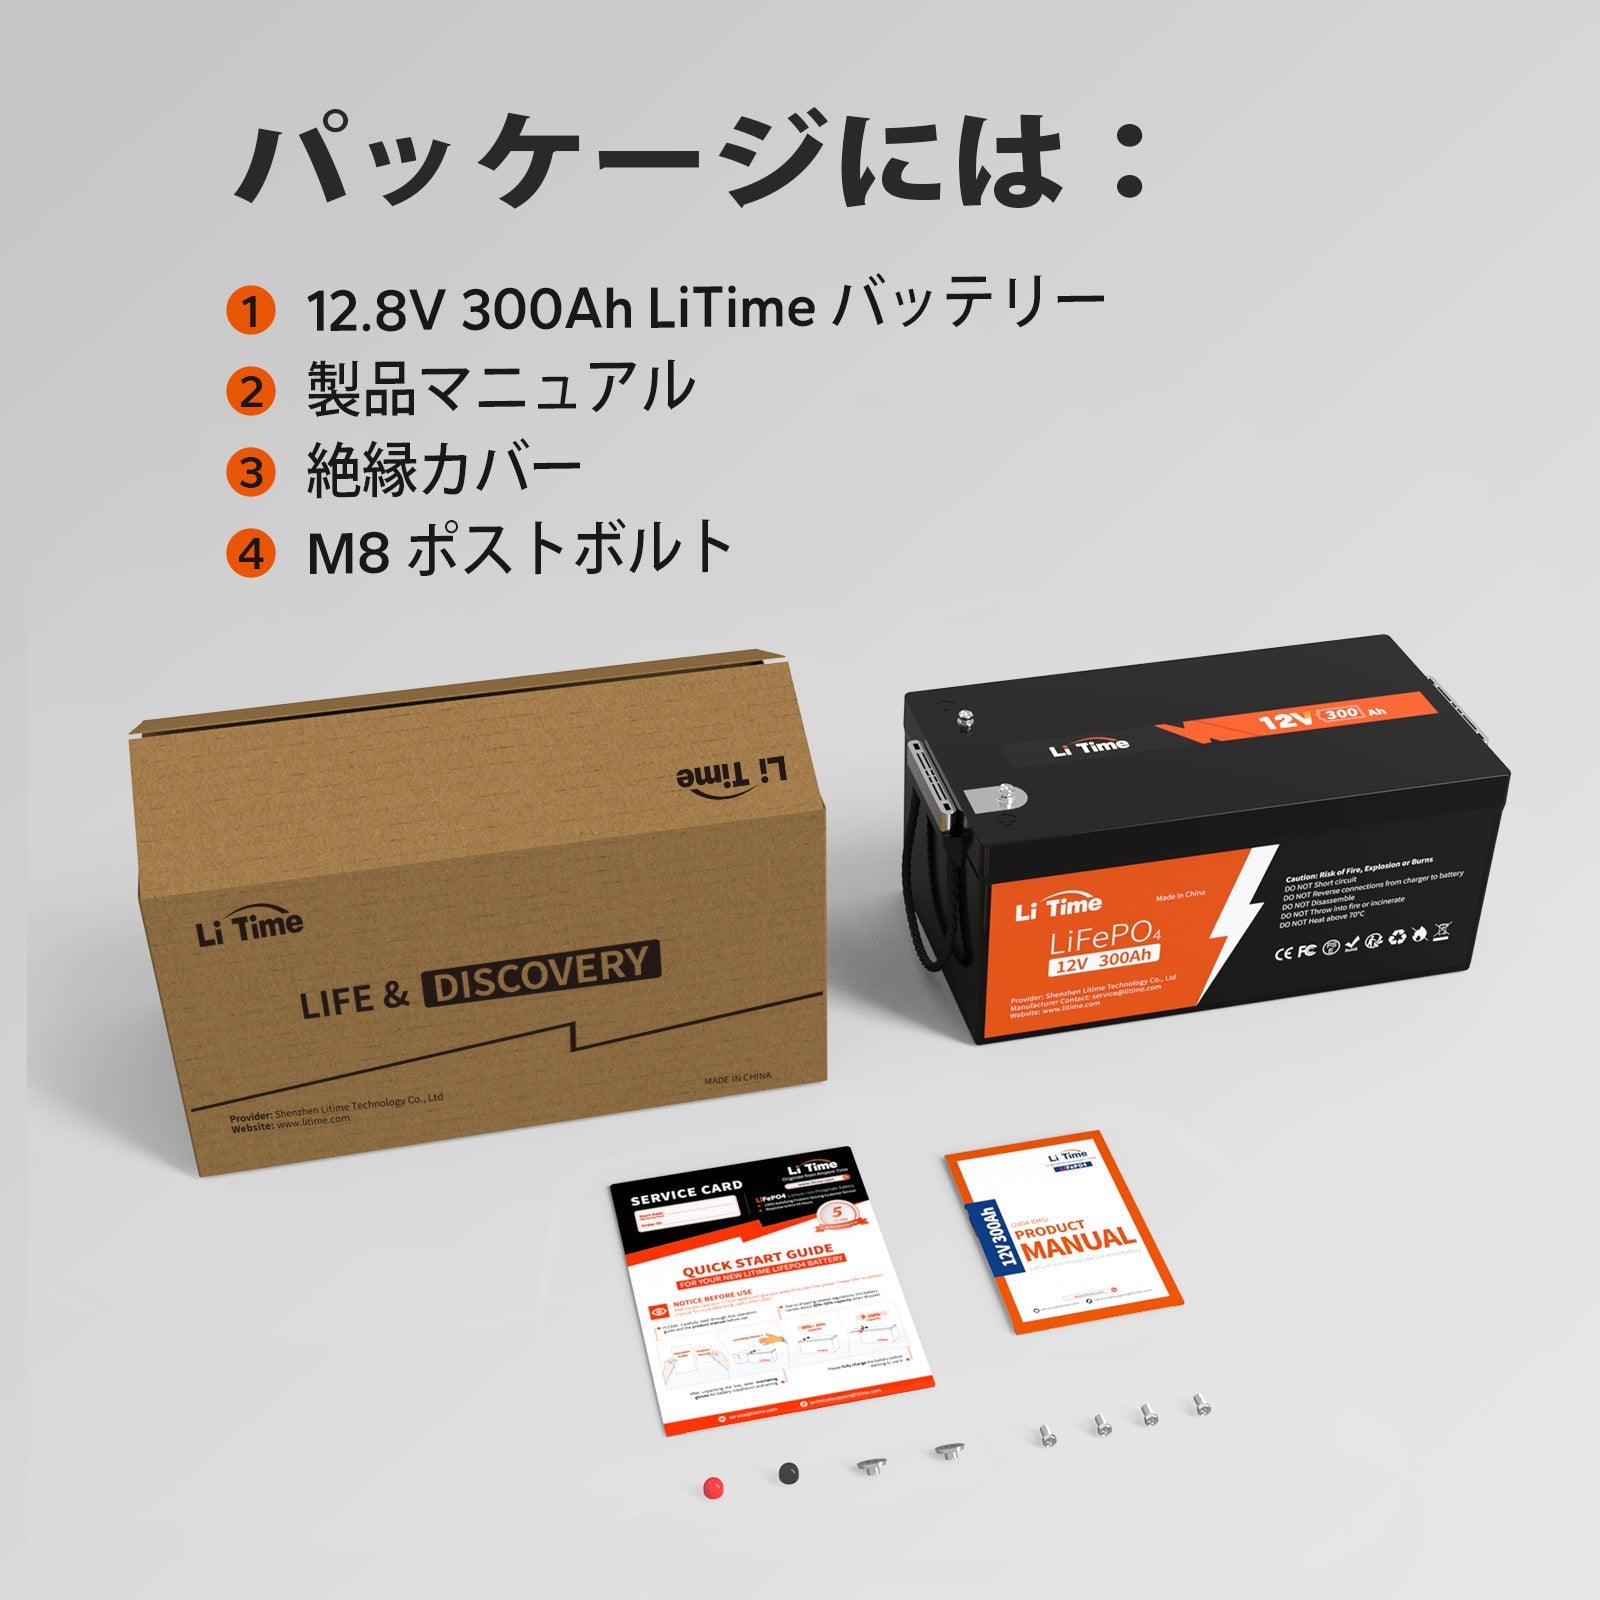 LiTime 「Ampere Time 」12V 300Ah LiFePO4 リン酸鉄リチウムイオンバッテリー 内蔵200A BMS ampere time